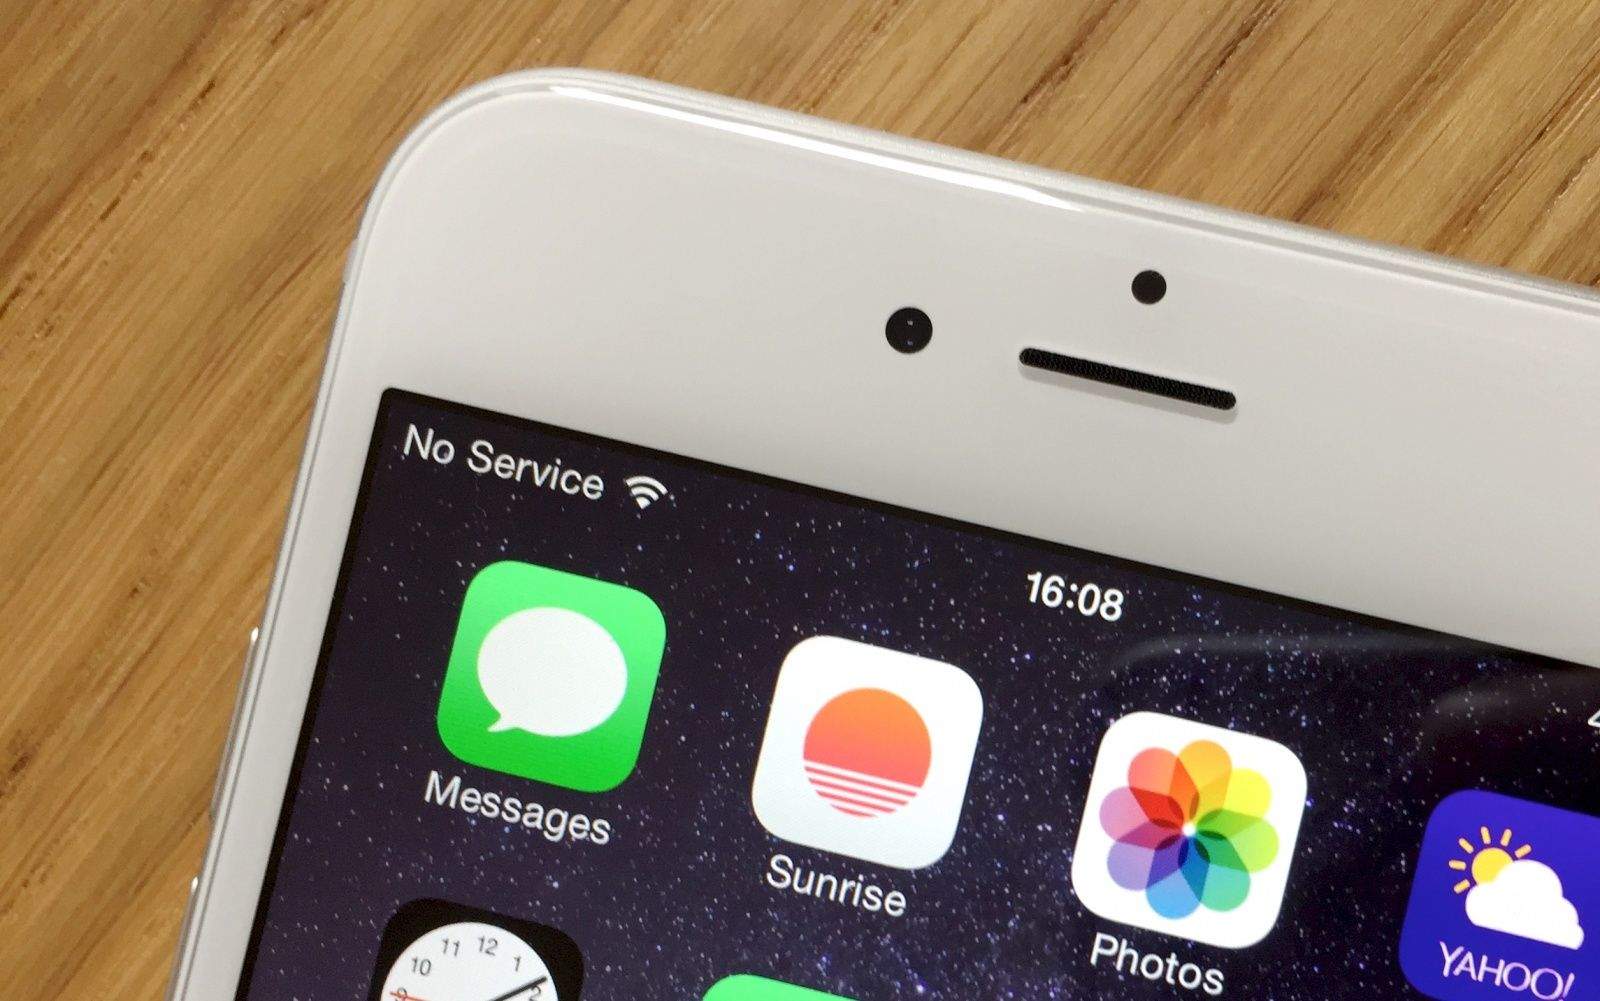 The iPhone 6s and iPhone 6s plus are coming on September 18th, according to German carriers.